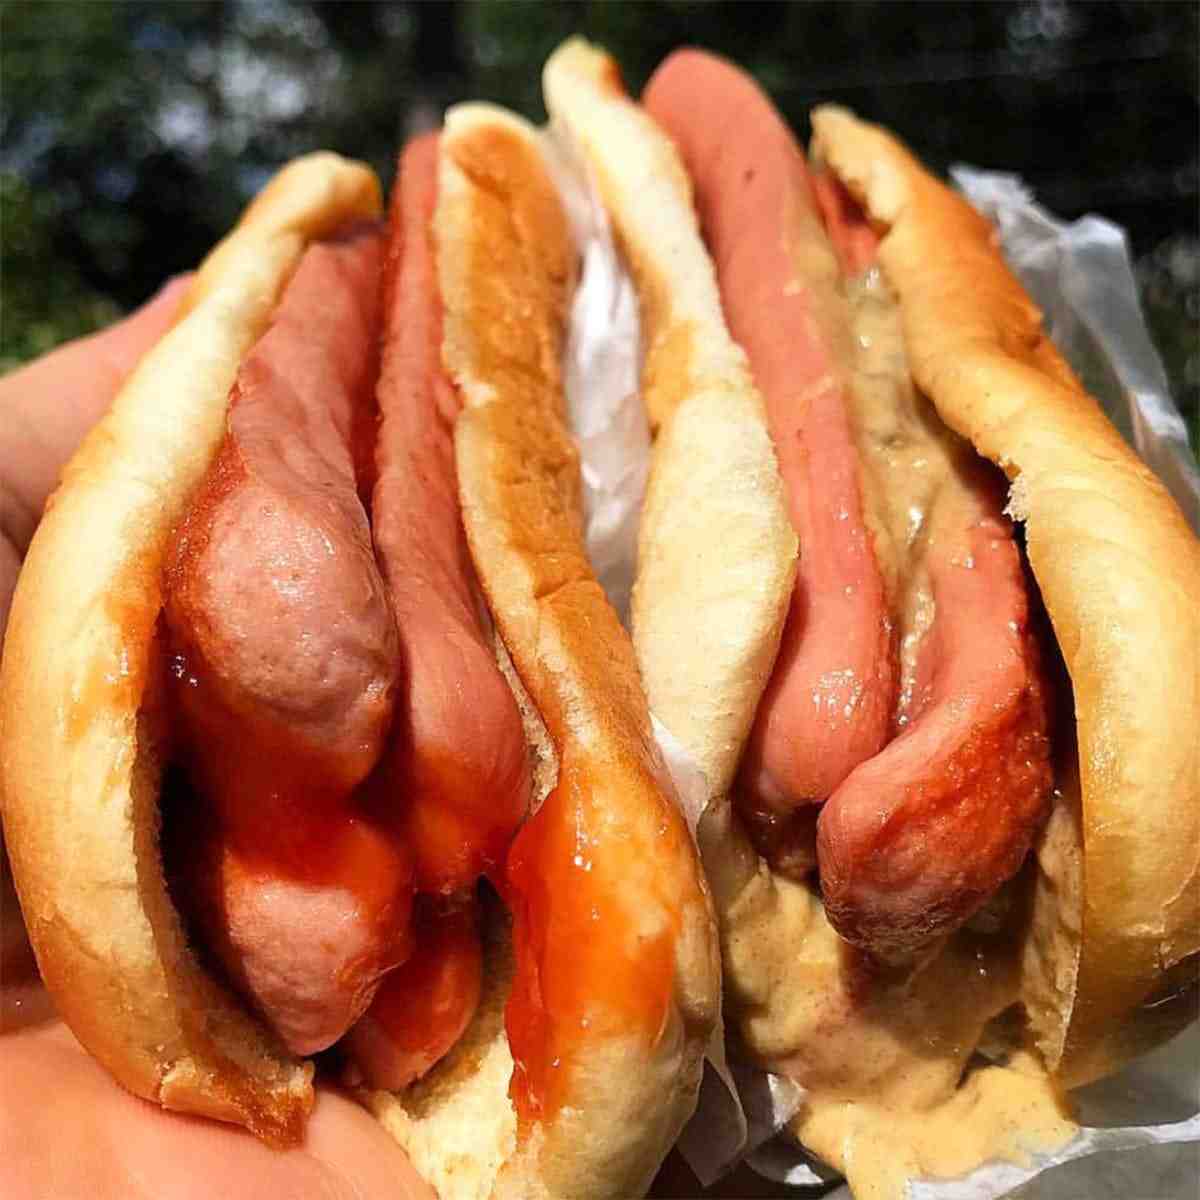 Can you eat discolored hot dogs?